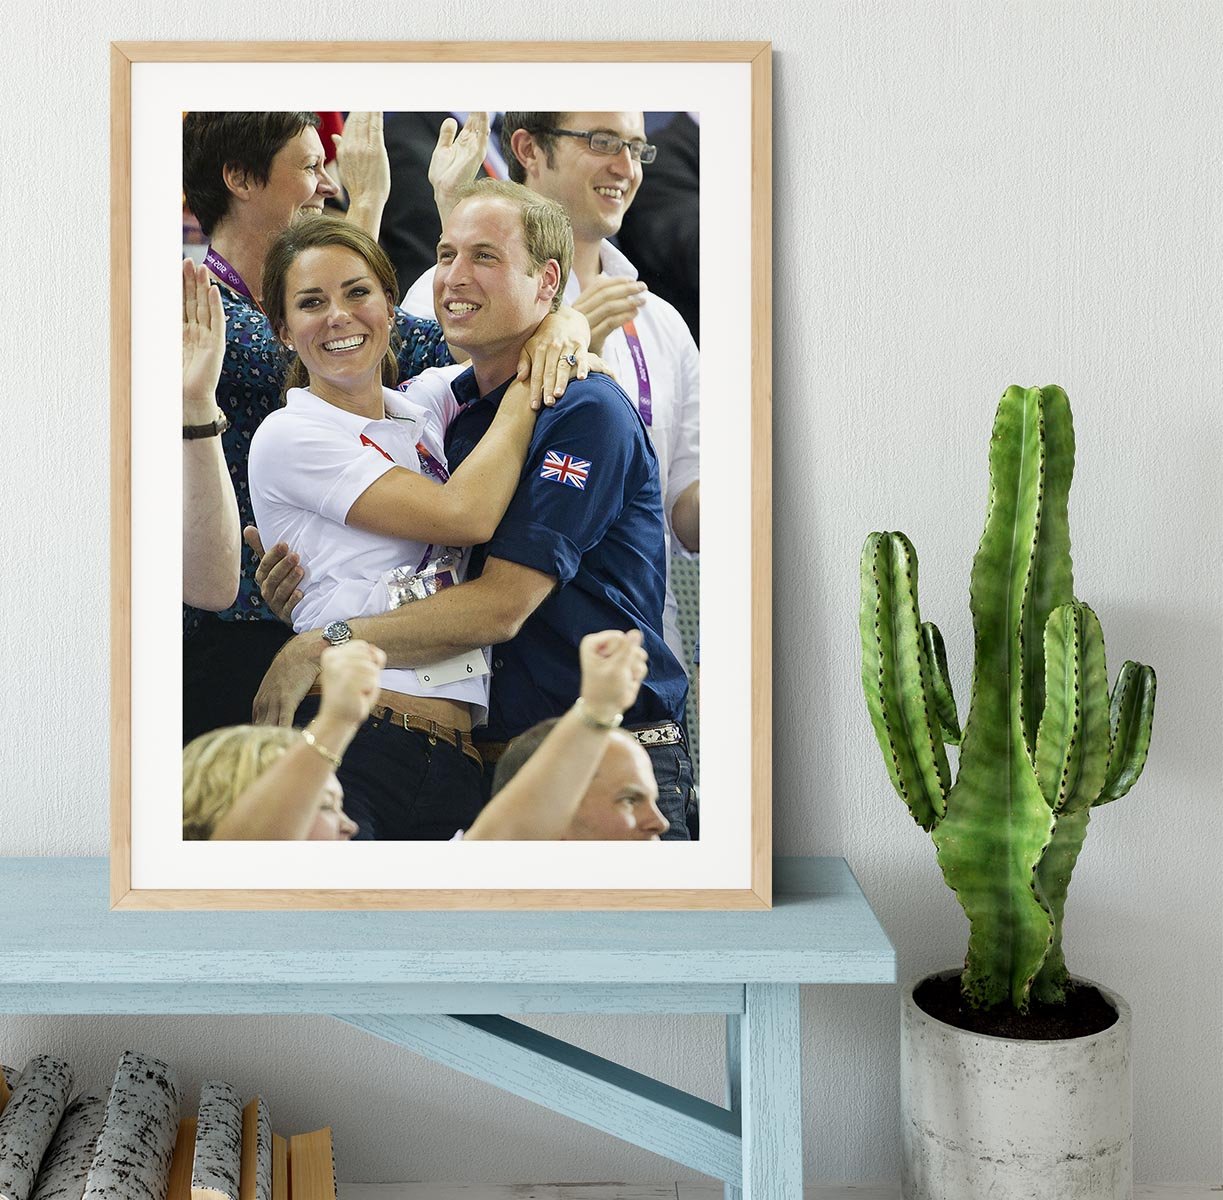 Prince William and Kate hugging at the 2012 Olympics Framed Print - Canvas Art Rocks - 3